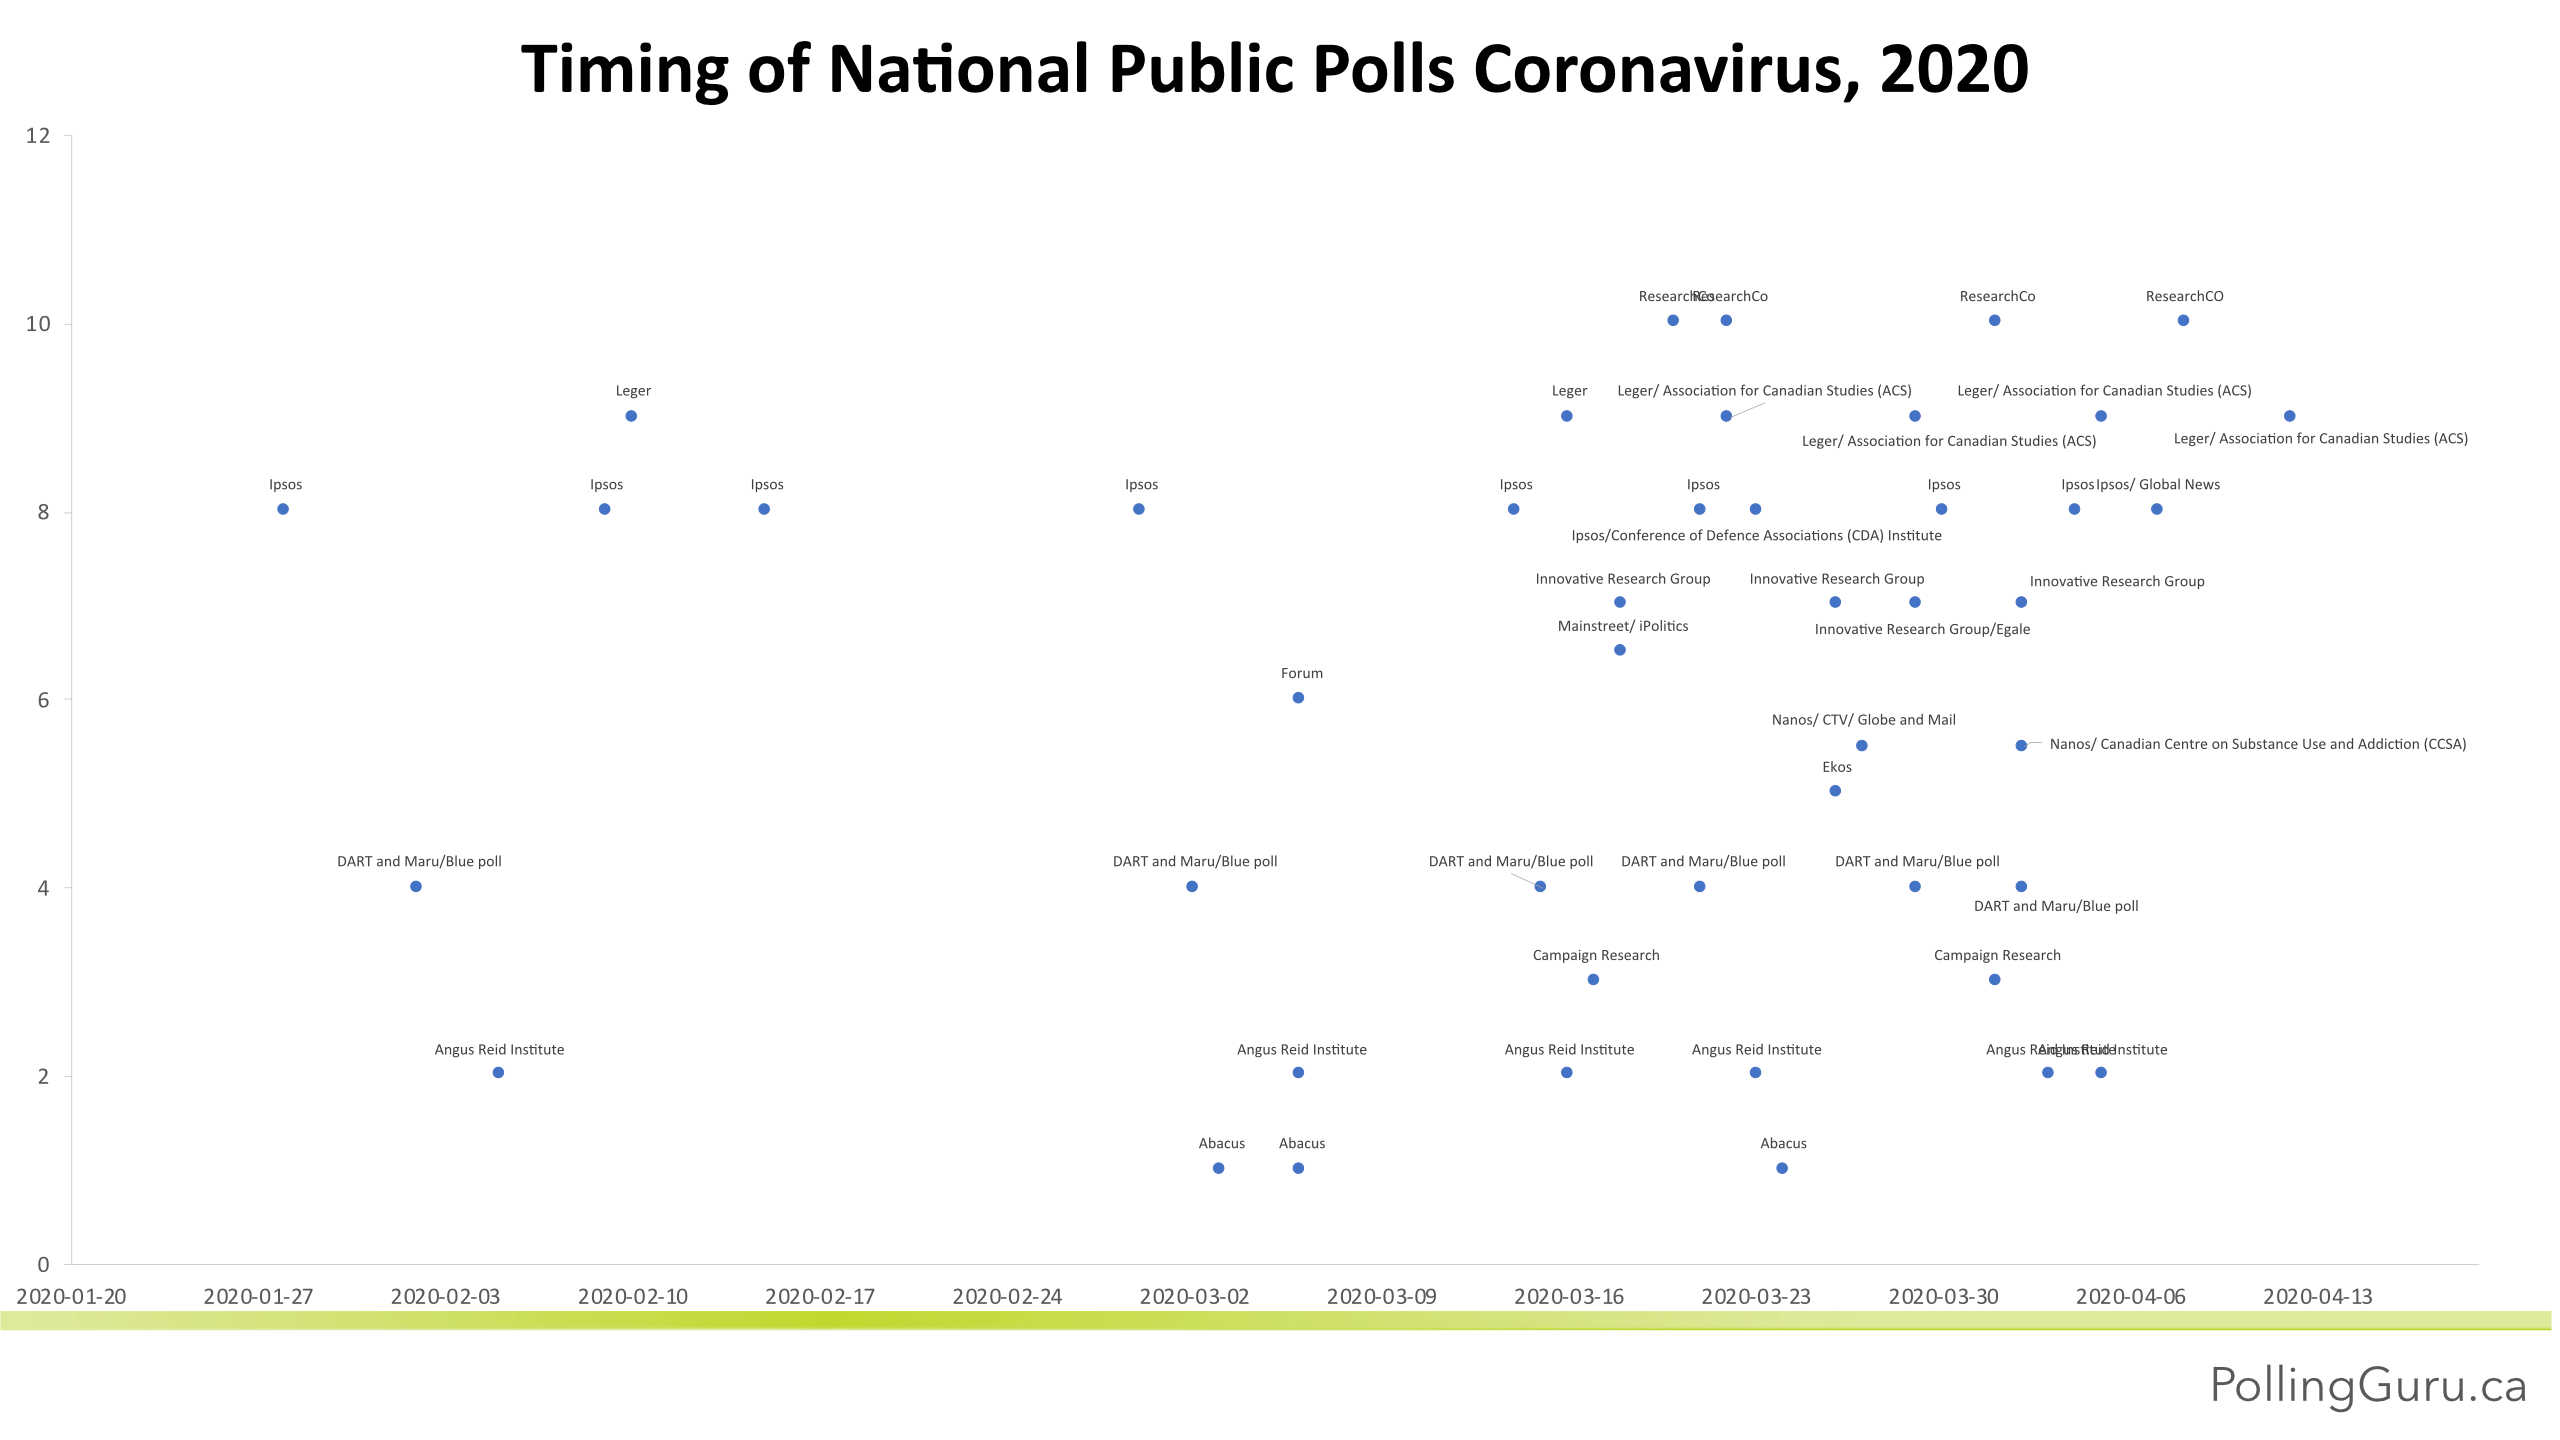 A visual showing the timeline of national COVID-19 polls